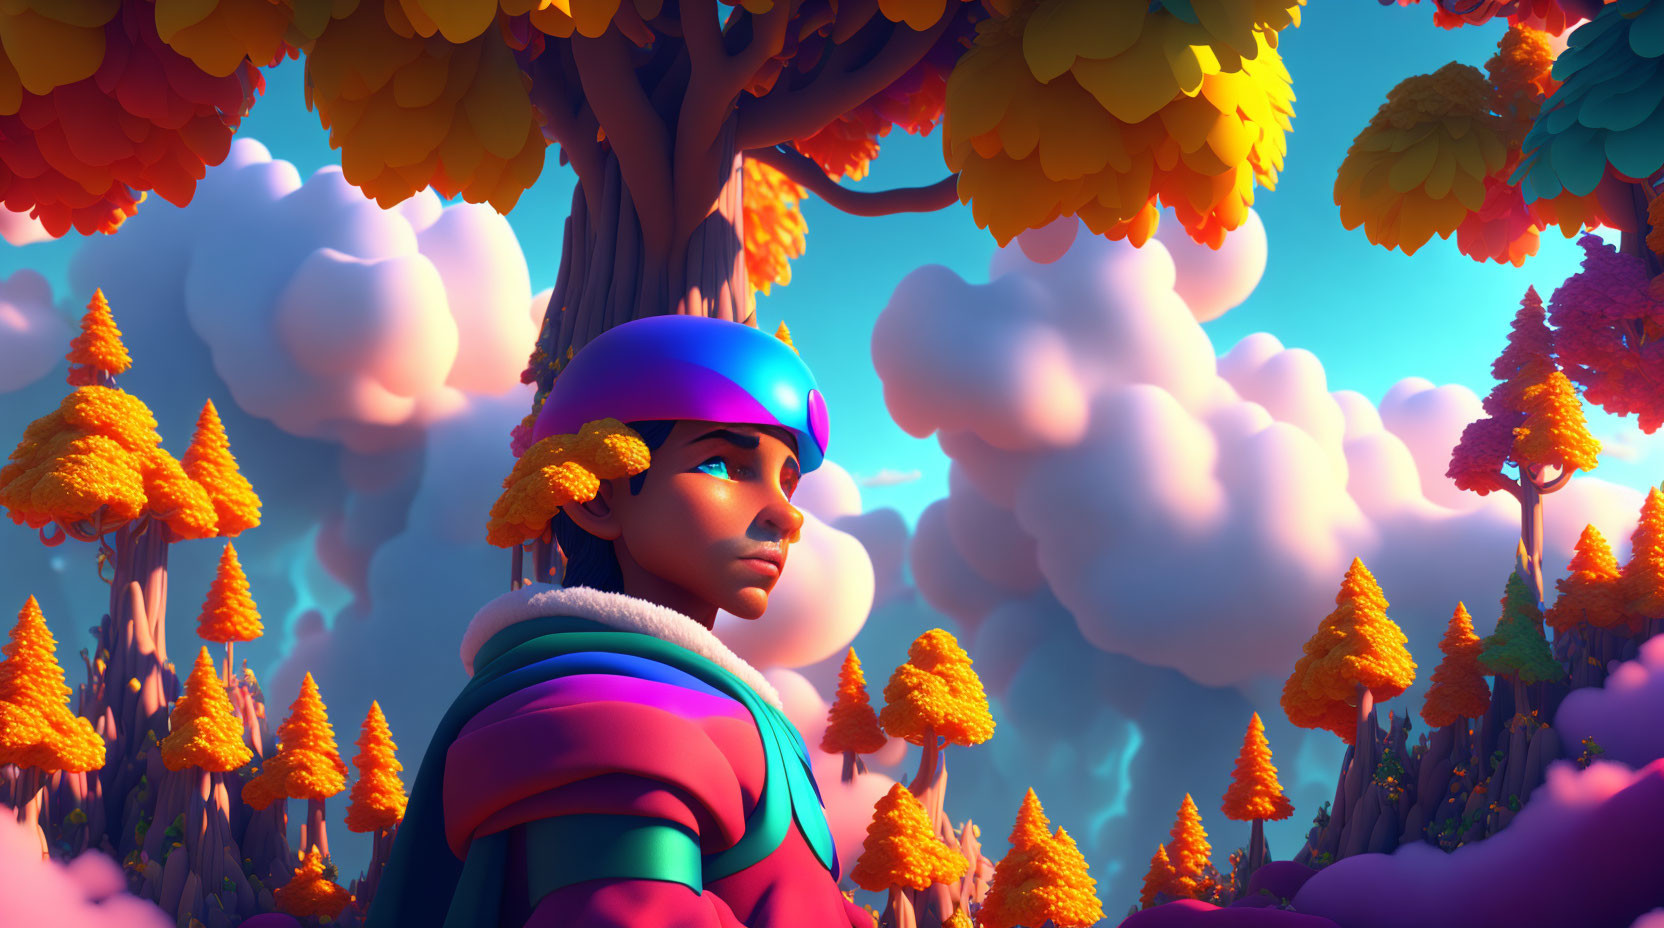 Person in helmet and outdoor gear among vibrant, stylized trees with orange and yellow foliage under surreal sky